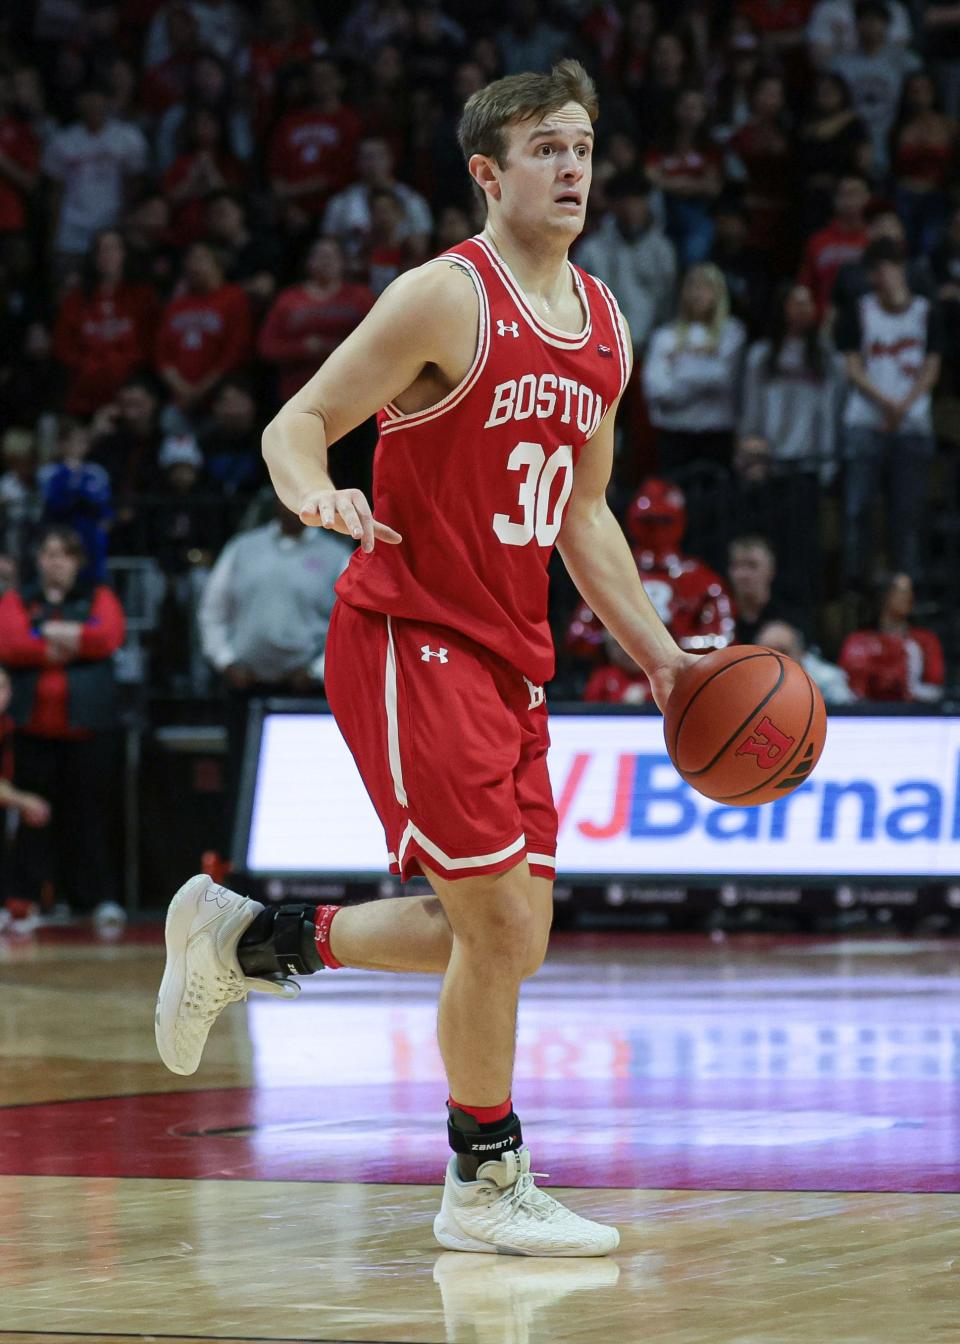 Nov 10, 2023; Piscataway, New Jersey, USA; Boston University Terriers guard Ben Roy (30) dribbles during the first half against the Rutgers Scarlet Knights at Jersey Mike's Arena.